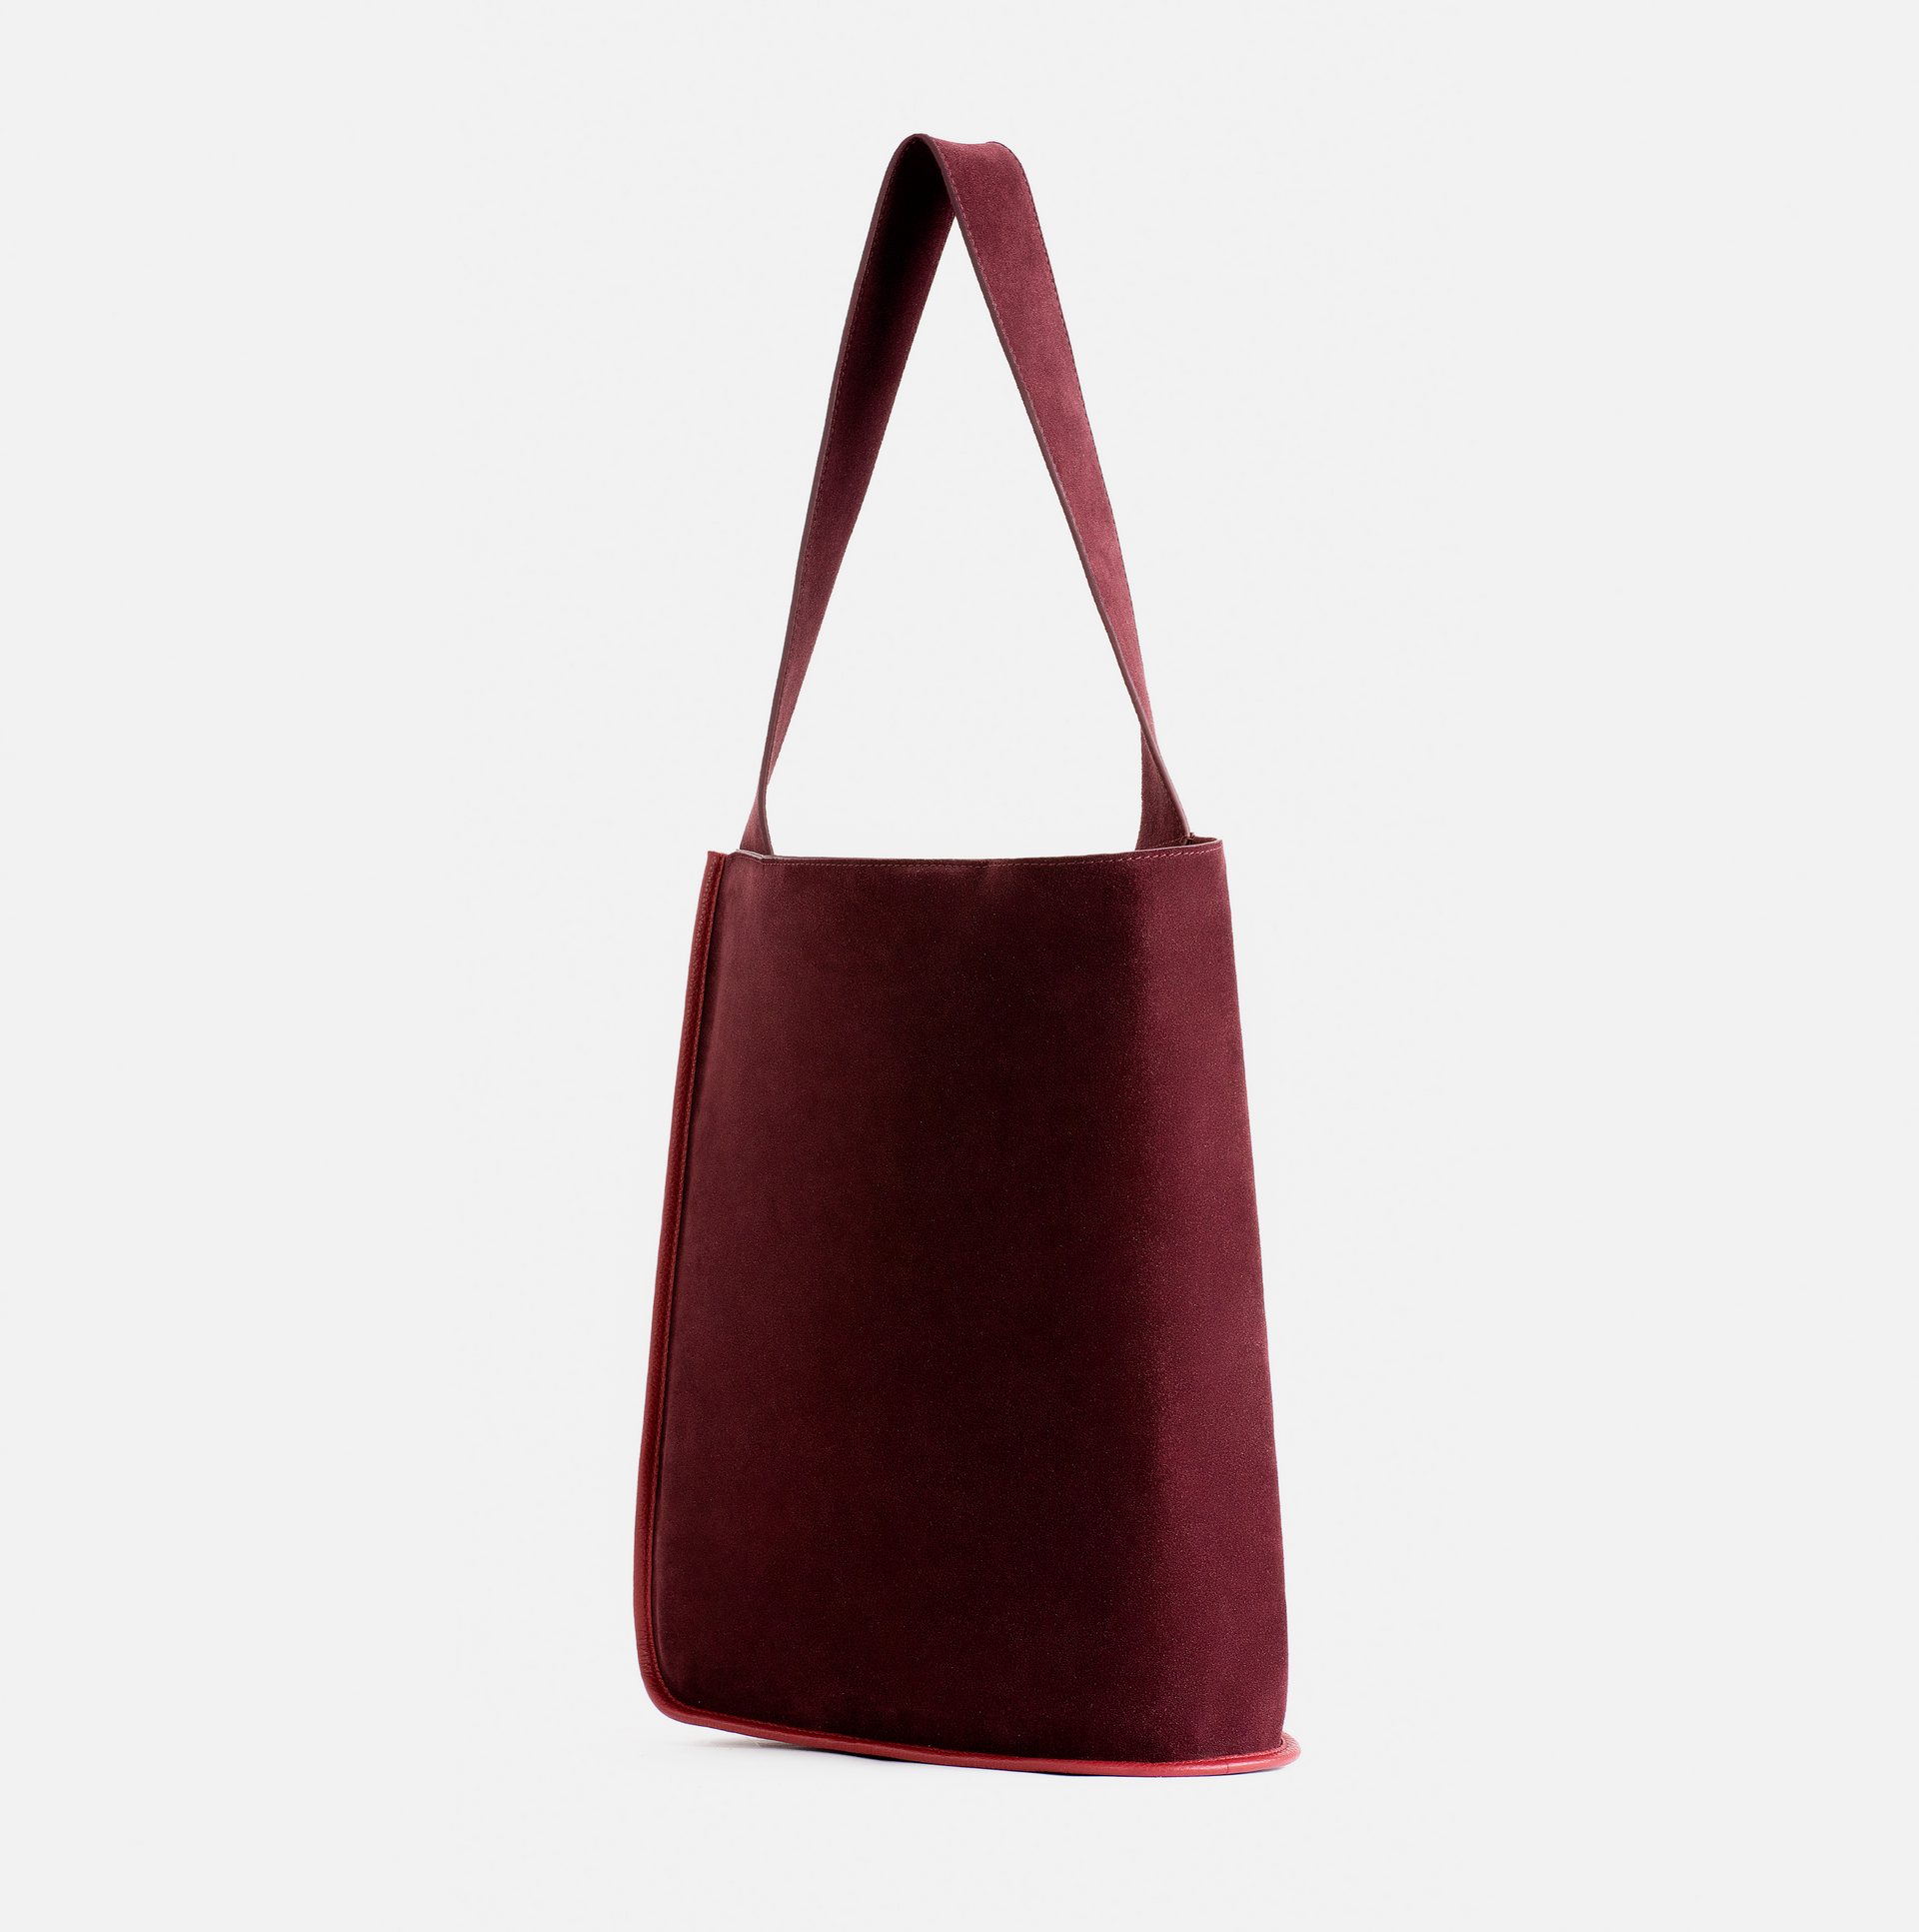 Eileen wraparound pebble leather shoulder bag in claret red / red currant